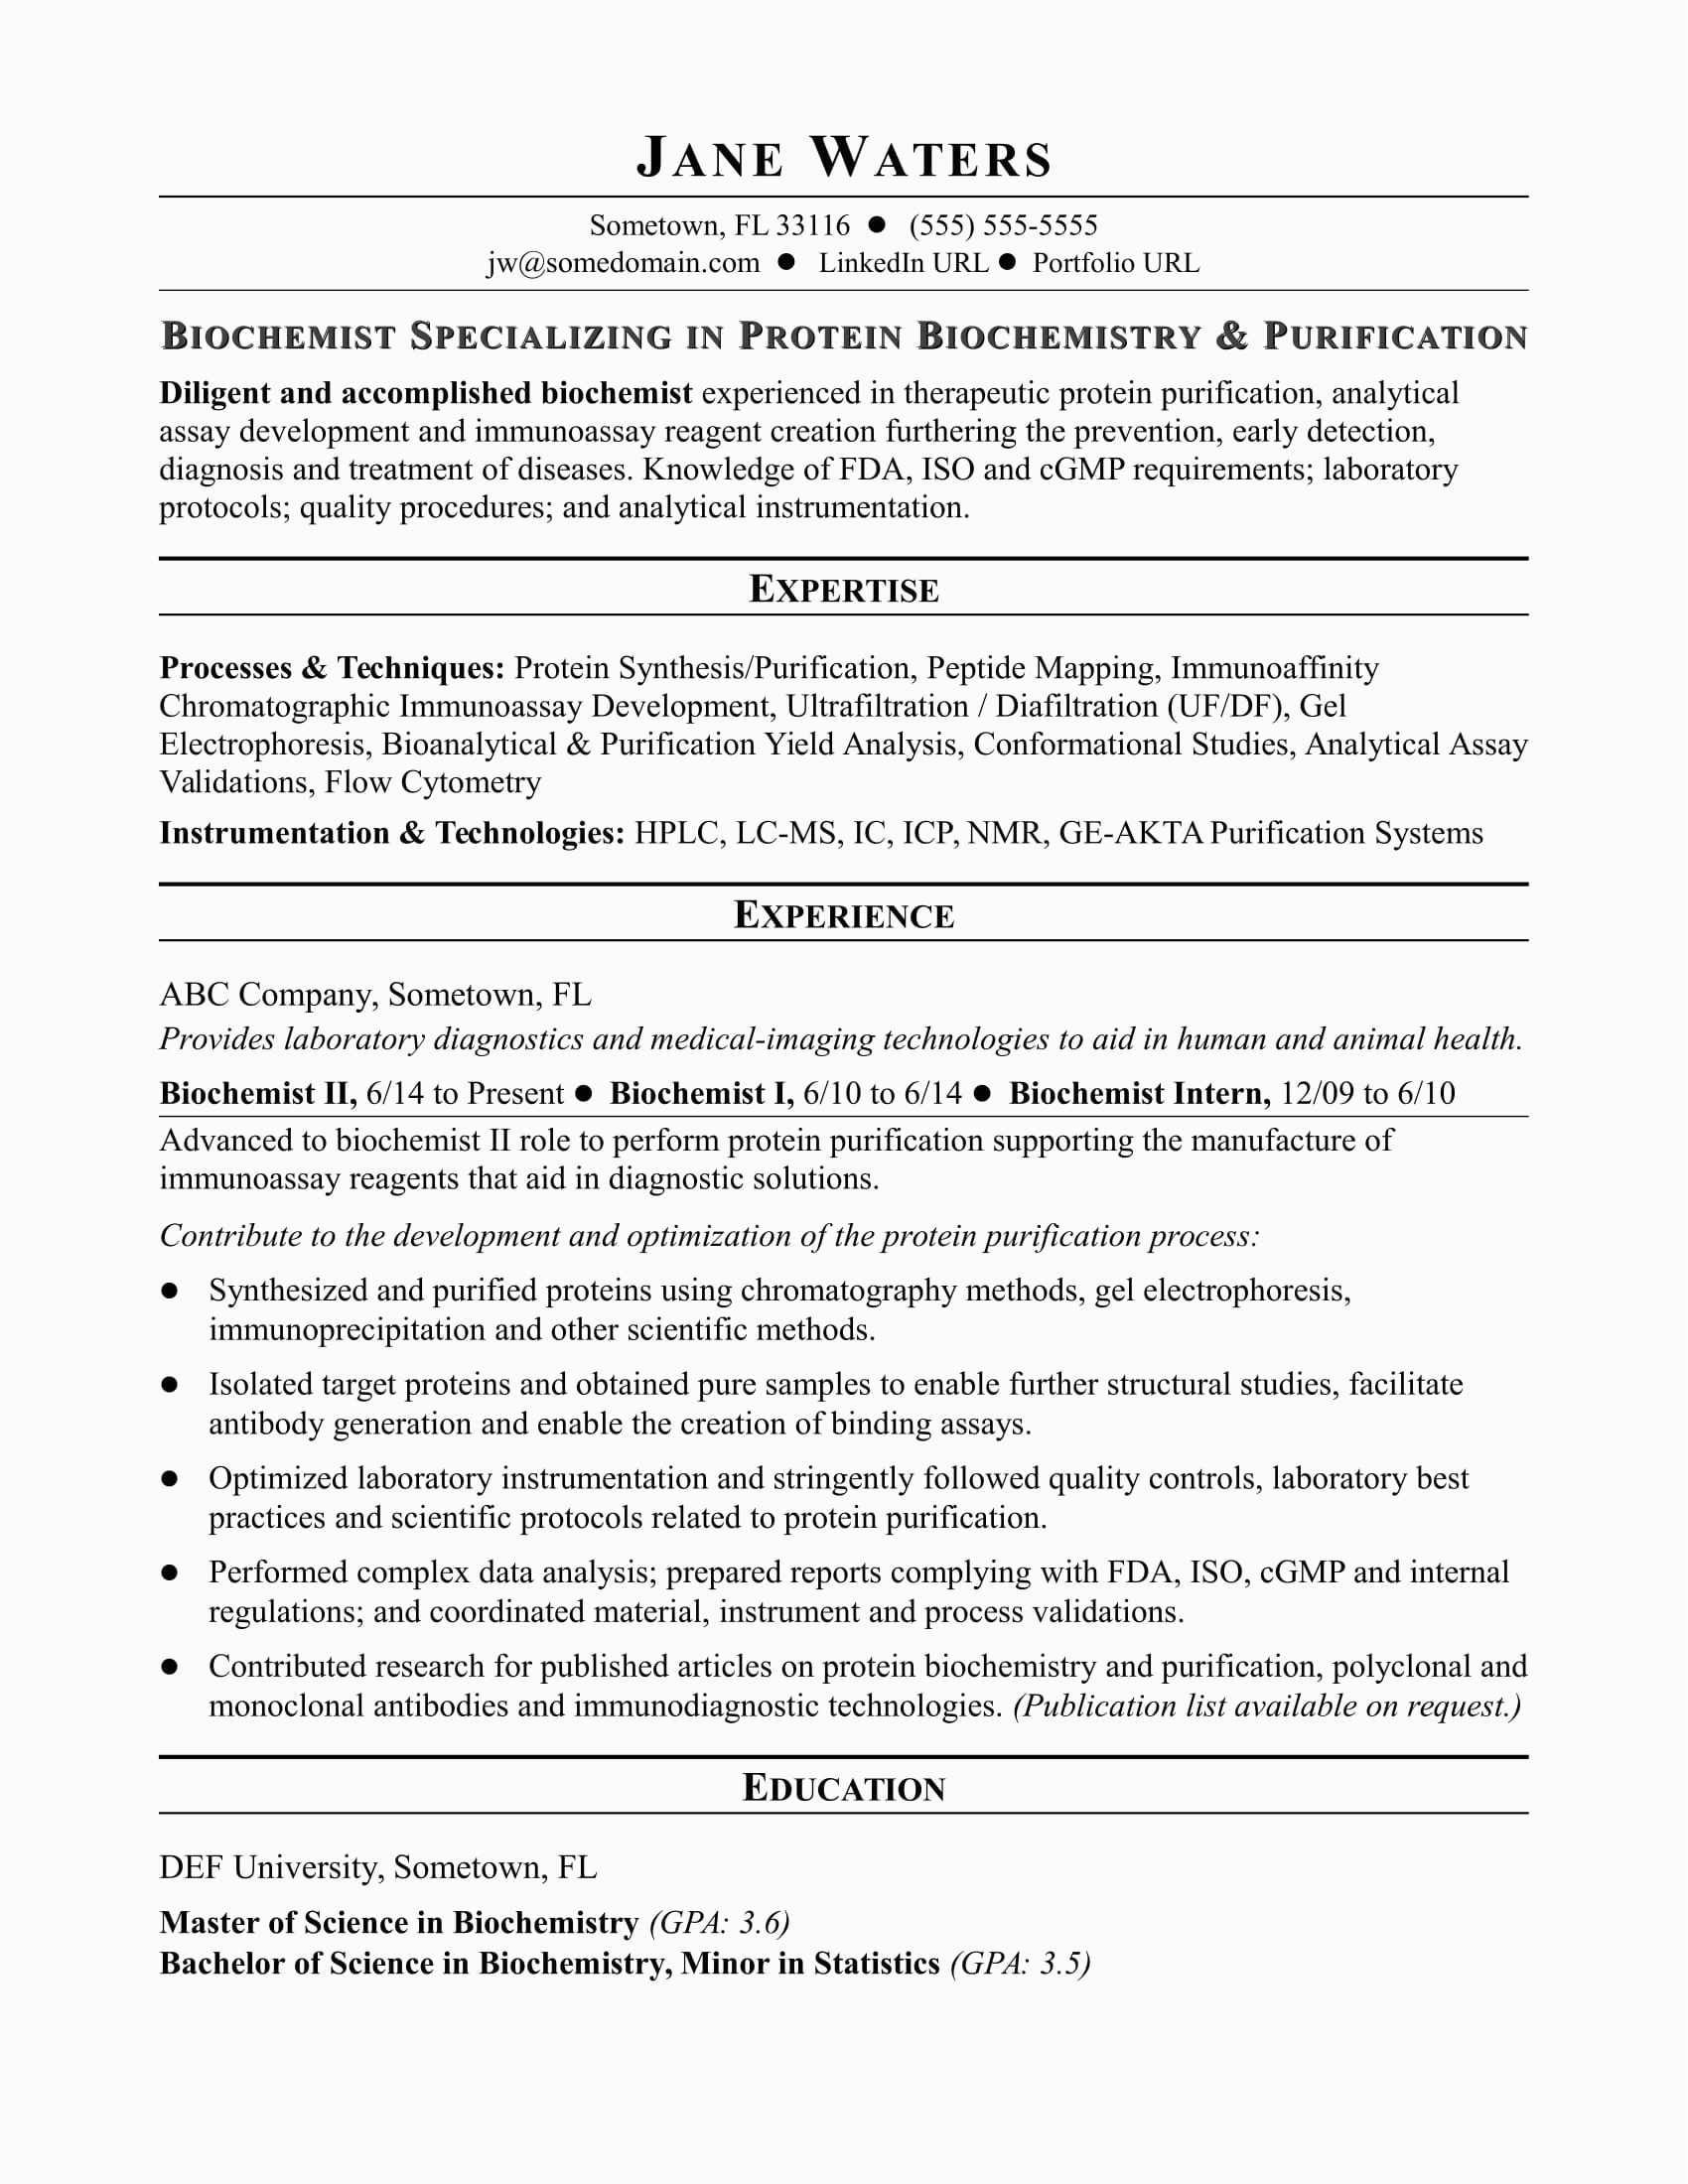 Sample Resumes for Entry Level Biochemists Analytical Chemist Resume Example